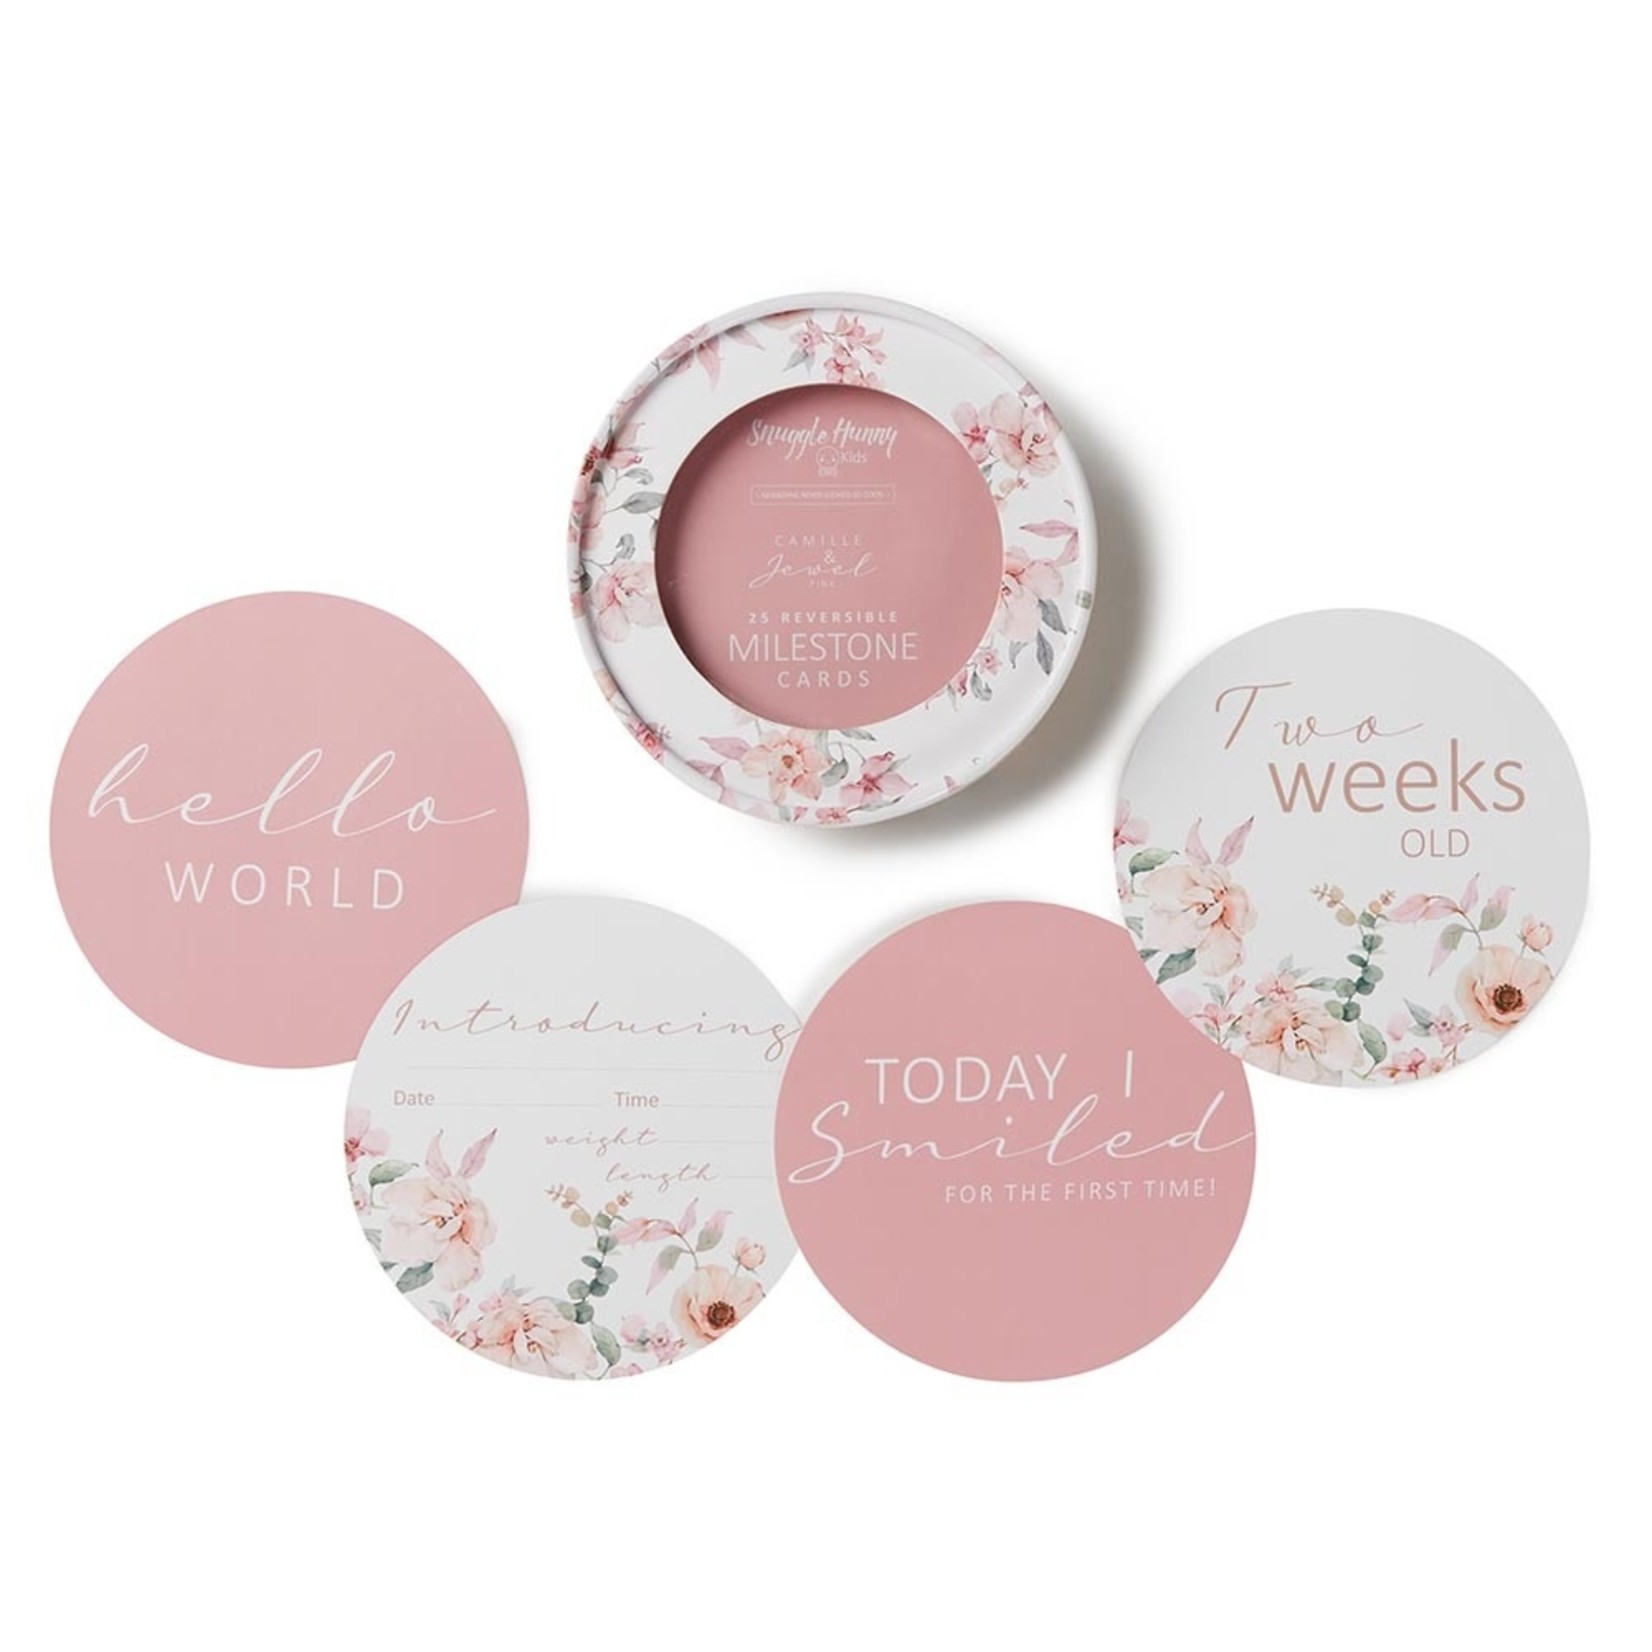 Snuggle Hunny Reversible Milestone Cards-Camille & Jewel Pink